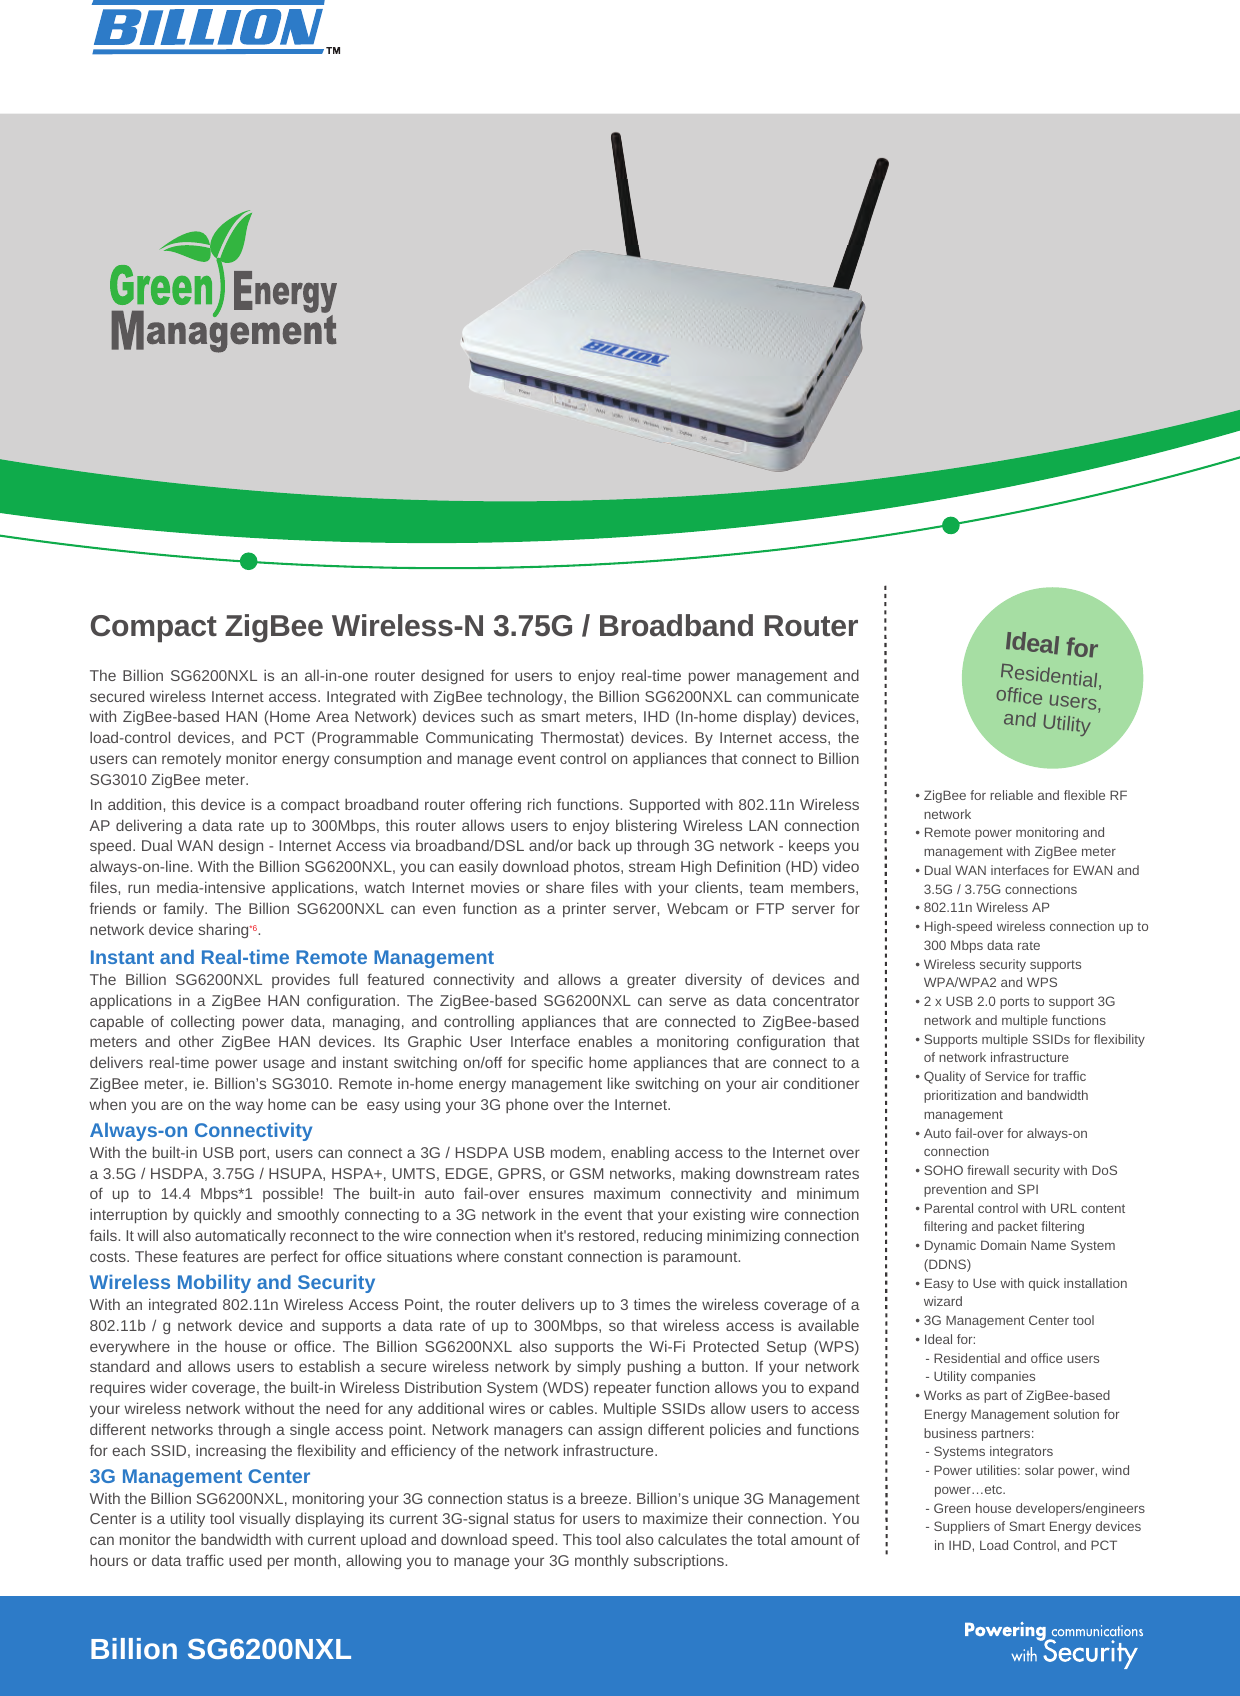 The Billion SG6200NXL is an all-in-one router designed for users to enjoy real-time power management and secured wireless Internet access. Integrated with ZigBee technology, the Billion SG6200NXL can communicate with ZigBee-based HAN (Home Area Network) devices such as smart meters, IHD (In-home display) devices, load-control devices,  and PCT  (Programmable Communicating  Thermostat) devices.  By Internet  access, the users can remotely monitor energy consumption and manage event control on appliances that connect to Billion SG3010 ZigBee meter.In addition, this device is a compact broadband router offering rich functions. Supported with 802.11n Wireless AP delivering a data rate up to 300Mbps, this router allows users to enjoy blistering Wireless LAN connection speed. Dual WAN design - Internet Access via broadband/DSL and/or back up through 3G network - keeps you always-on-line. With the Billion SG6200NXL, you can easily download photos, stream High Definition (HD) video files, run media-intensive applications, watch Internet movies or share files with your clients, team members, friends or family. The Billion  SG6200NXL can even  function as  a printer server,  Webcam or FTP  server for network device sharing*6. Instant and Real-time Remote ManagementThe  Billion  SG6200NXL  provides  full  featured  connectivity  and  allows  a  greater  diversity  of  devices  and applications in a ZigBee HAN configuration. The ZigBee-based SG6200NXL can serve  as data concentrator capable of  collecting power data,  managing, and  controlling appliances that  are connected  to ZigBee-based meters  and  other  ZigBee  HAN  devices.  Its  Graphic  User  Interface  enables  a  monitoring  configuration  that delivers real-time power usage and instant switching on/off for specific home appliances that are connect to a ZigBee meter, ie. Billion’s SG3010. Remote in-home energy management like switching on your air conditioner when you are on the way home can be  easy using your 3G phone over the Internet.Always-on ConnectivityWith the built-in USB port, users can connect a 3G / HSDPA USB modem, enabling access to the Internet over a 3.5G / HSDPA, 3.75G / HSUPA, HSPA+, UMTS, EDGE, GPRS, or GSM networks, making downstream rates of  up  to  14.4  Mbps*1  possible!  The  built-in  auto  fail-over  ensures  maximum  connectivity  and  minimum interruption by quickly and smoothly connecting to a 3G network in the event that your existing wire connection fails. It will also automatically reconnect to the wire connection when it&apos;s restored, reducing minimizing connection costs. These features are perfect for office situations where constant connection is paramount.Wireless Mobility and SecurityWith an integrated 802.11n Wireless Access Point, the router delivers up to 3 times the wireless coverage of a 802.11b / g network device and supports a data rate of up to 300Mbps, so that wireless access is available everywhere in the house or  office.  The  Billion  SG6200NXL also supports the Wi-Fi  Protected  Setup  (WPS) standard and allows users to establish a secure wireless network by simply pushing a button. If your network requires wider coverage, the built-in Wireless Distribution System (WDS) repeater function allows you to expand your wireless network without the need for any additional wires or cables. Multiple SSIDs allow users to access different networks through a single access point. Network managers can assign different policies and functions for each SSID, increasing the flexibility and efficiency of the network infrastructure.3G Management CenterWith the Billion SG6200NXL, monitoring your 3G connection status is a breeze. Billion’s unique 3G Management Center is a utility tool visually displaying its current 3G-signal status for users to maximize their connection. You can monitor the bandwidth with current upload and download speed. This tool also calculates the total amount of hours or data traffic used per month, allowing you to manage your 3G monthly subscriptions. • ZigBee for reliable and flexible RF network• Remote power monitoring and management with ZigBee meter• Dual WAN interfaces for EWAN and 3.5G / 3.75G connections• 802.11n Wireless AP • High-speed wireless connection up to 300 Mbps data rate• Wireless security supports WPA/WPA2 and WPS • 2 x USB 2.0 ports to support 3G network and multiple functions• Supports multiple SSIDs for flexibility of network infrastructure• Quality of Service for traffic prioritization and bandwidth management• Auto fail-over for always-on connection• SOHO firewall security with DoS prevention and SPI• Parental control with URL content filtering and packet filtering• Dynamic Domain Name System (DDNS) • Easy to Use with quick installation wizard• 3G Management Center tool• Ideal for:- Residential and office users- Utility companies• Works as part of ZigBee-based Energy Management solution for business partners:- Systems integrators- Power utilities: solar power, wind power…etc.- Green house developers/engineers - Suppliers of Smart Energy devices in IHD, Load Control, and PCTCompact ZigBee Wireless-N 3.75G / Broadband RouterBillion SG6200NXLIdeal forResidential,office users,and Utility